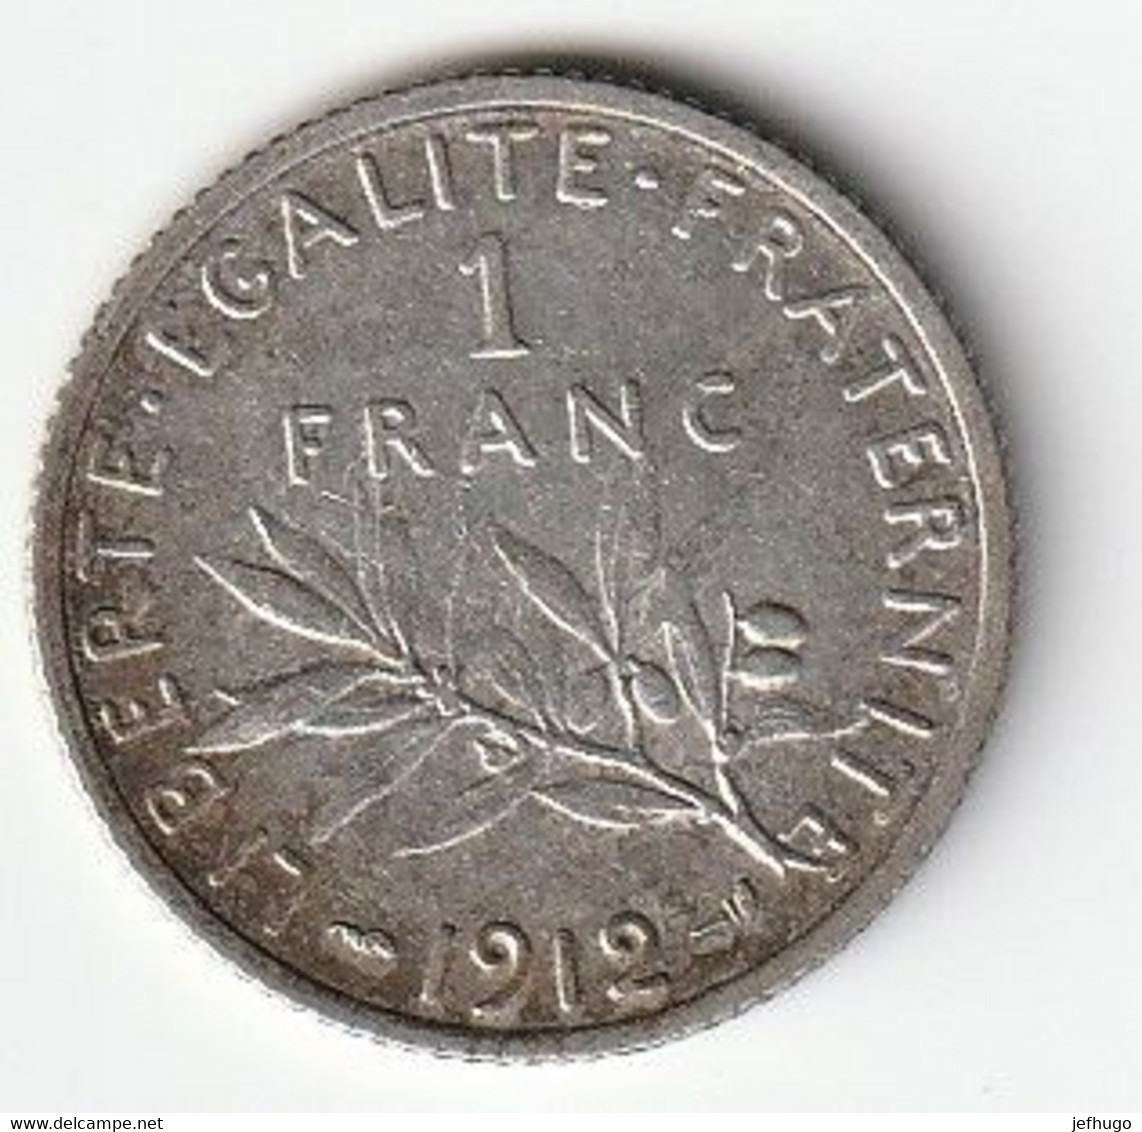 1 FRANCS ARGENT SEMEUSE ROTY . 1912 . SCAN RECTO - 1 Franc